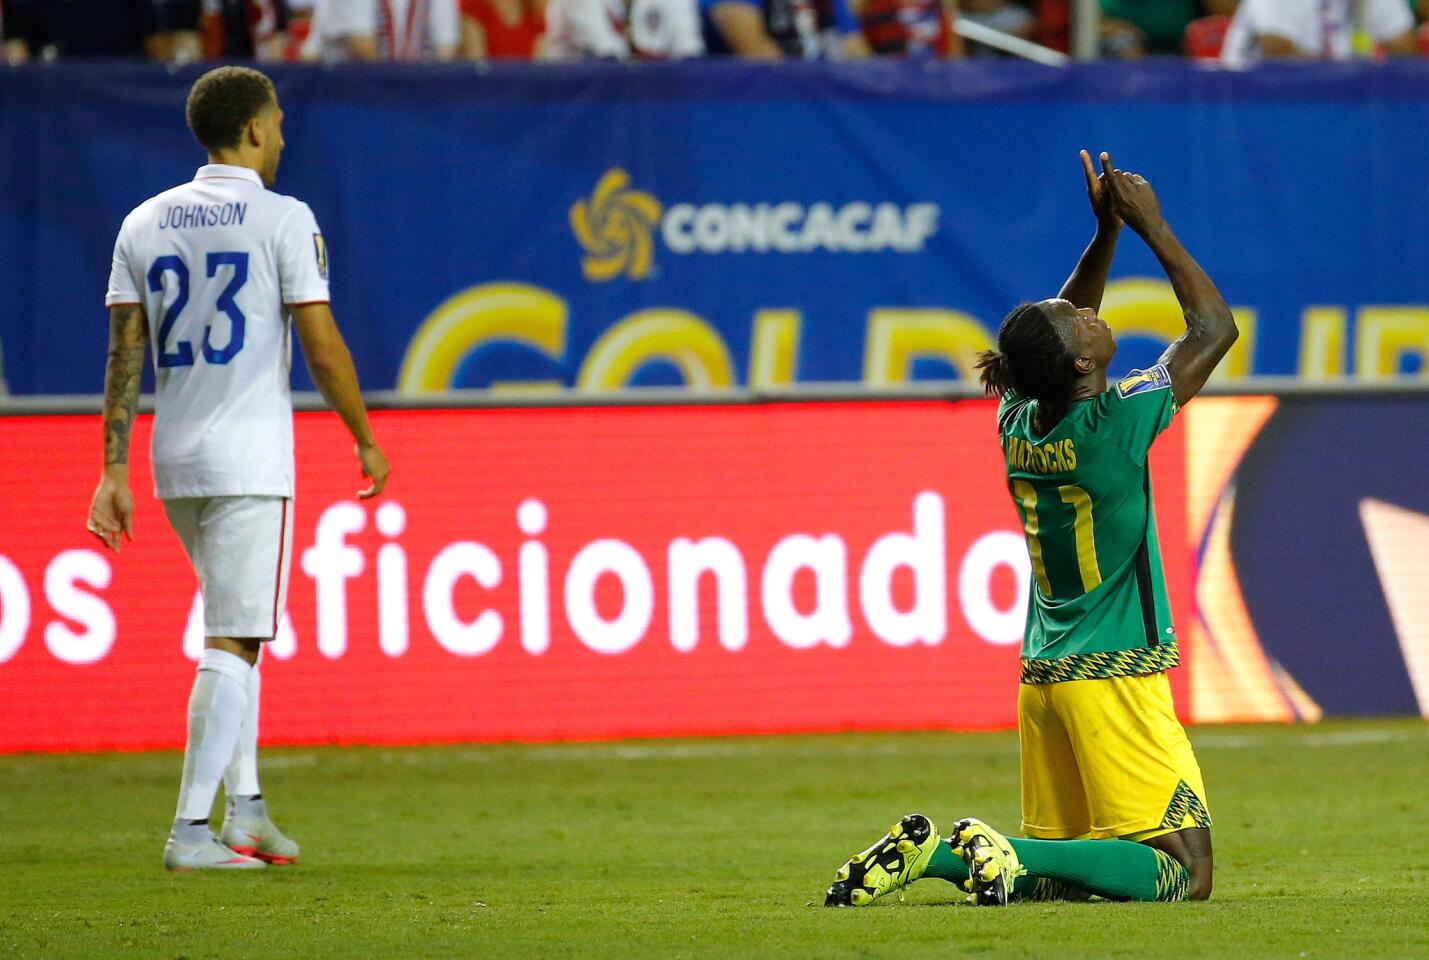 ATLANTA, GA - JULY 22: Darren Mattocks #11 of Jamaica celebrates scoring the opening goal against the United States of America during the 2015 CONCACAF Golf Cup Semifinal match between Jamaica and the United States at Georgia Dome on July 22, 2015 in Atlanta, Georgia. (Photo by Kevin C. Cox/Getty Images) ** OUTS - ELSENT, FPG - OUTS * NM, PH, VA if sourced by CT, LA or MoD **